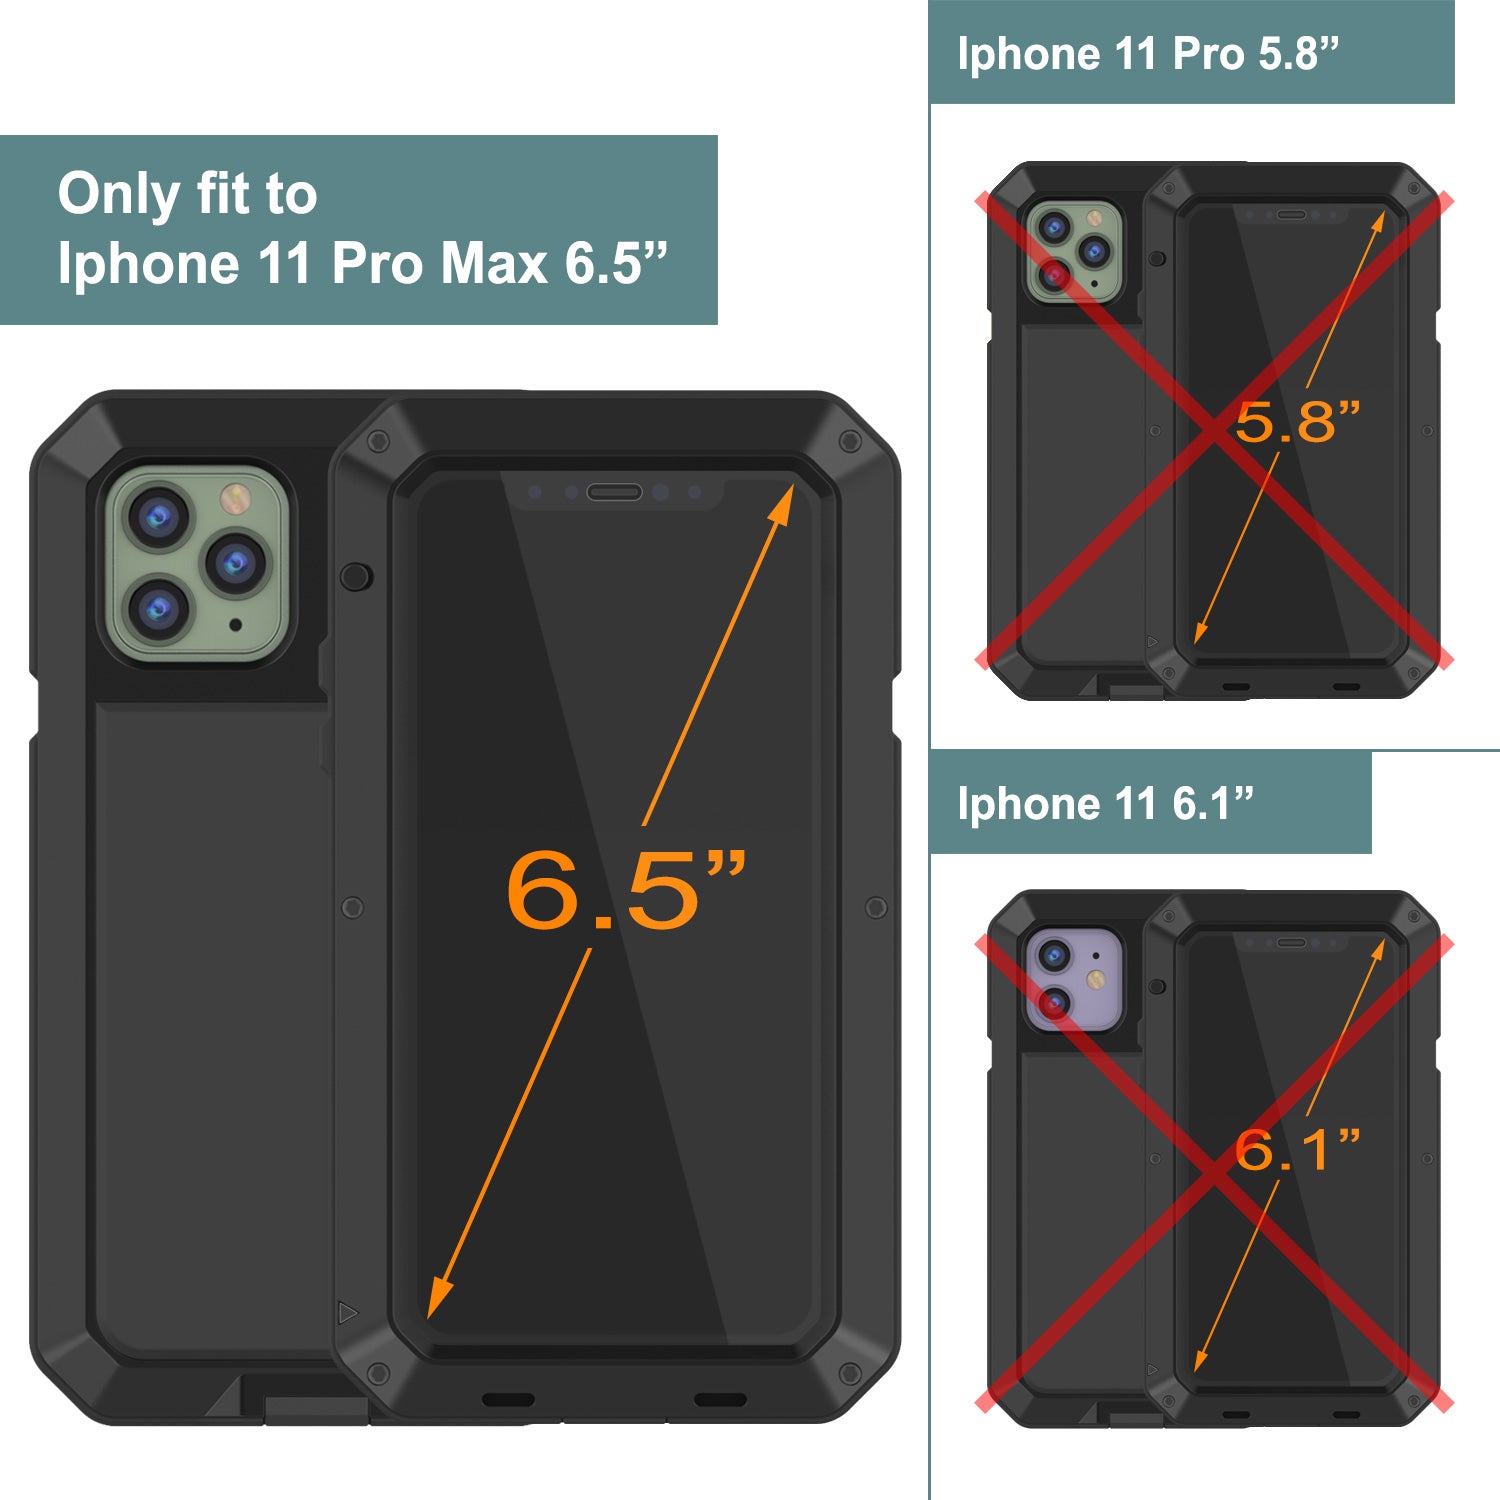  iPhone 11 Pro Max Case,360 Full Body Protective Cover Heavy  Duty Shockproof [Tough Armour] Aluminum Alloy Metal Case with Silicone  Built-in Screen Protector for iPhone 11 Pro Max 6.5 Inch 